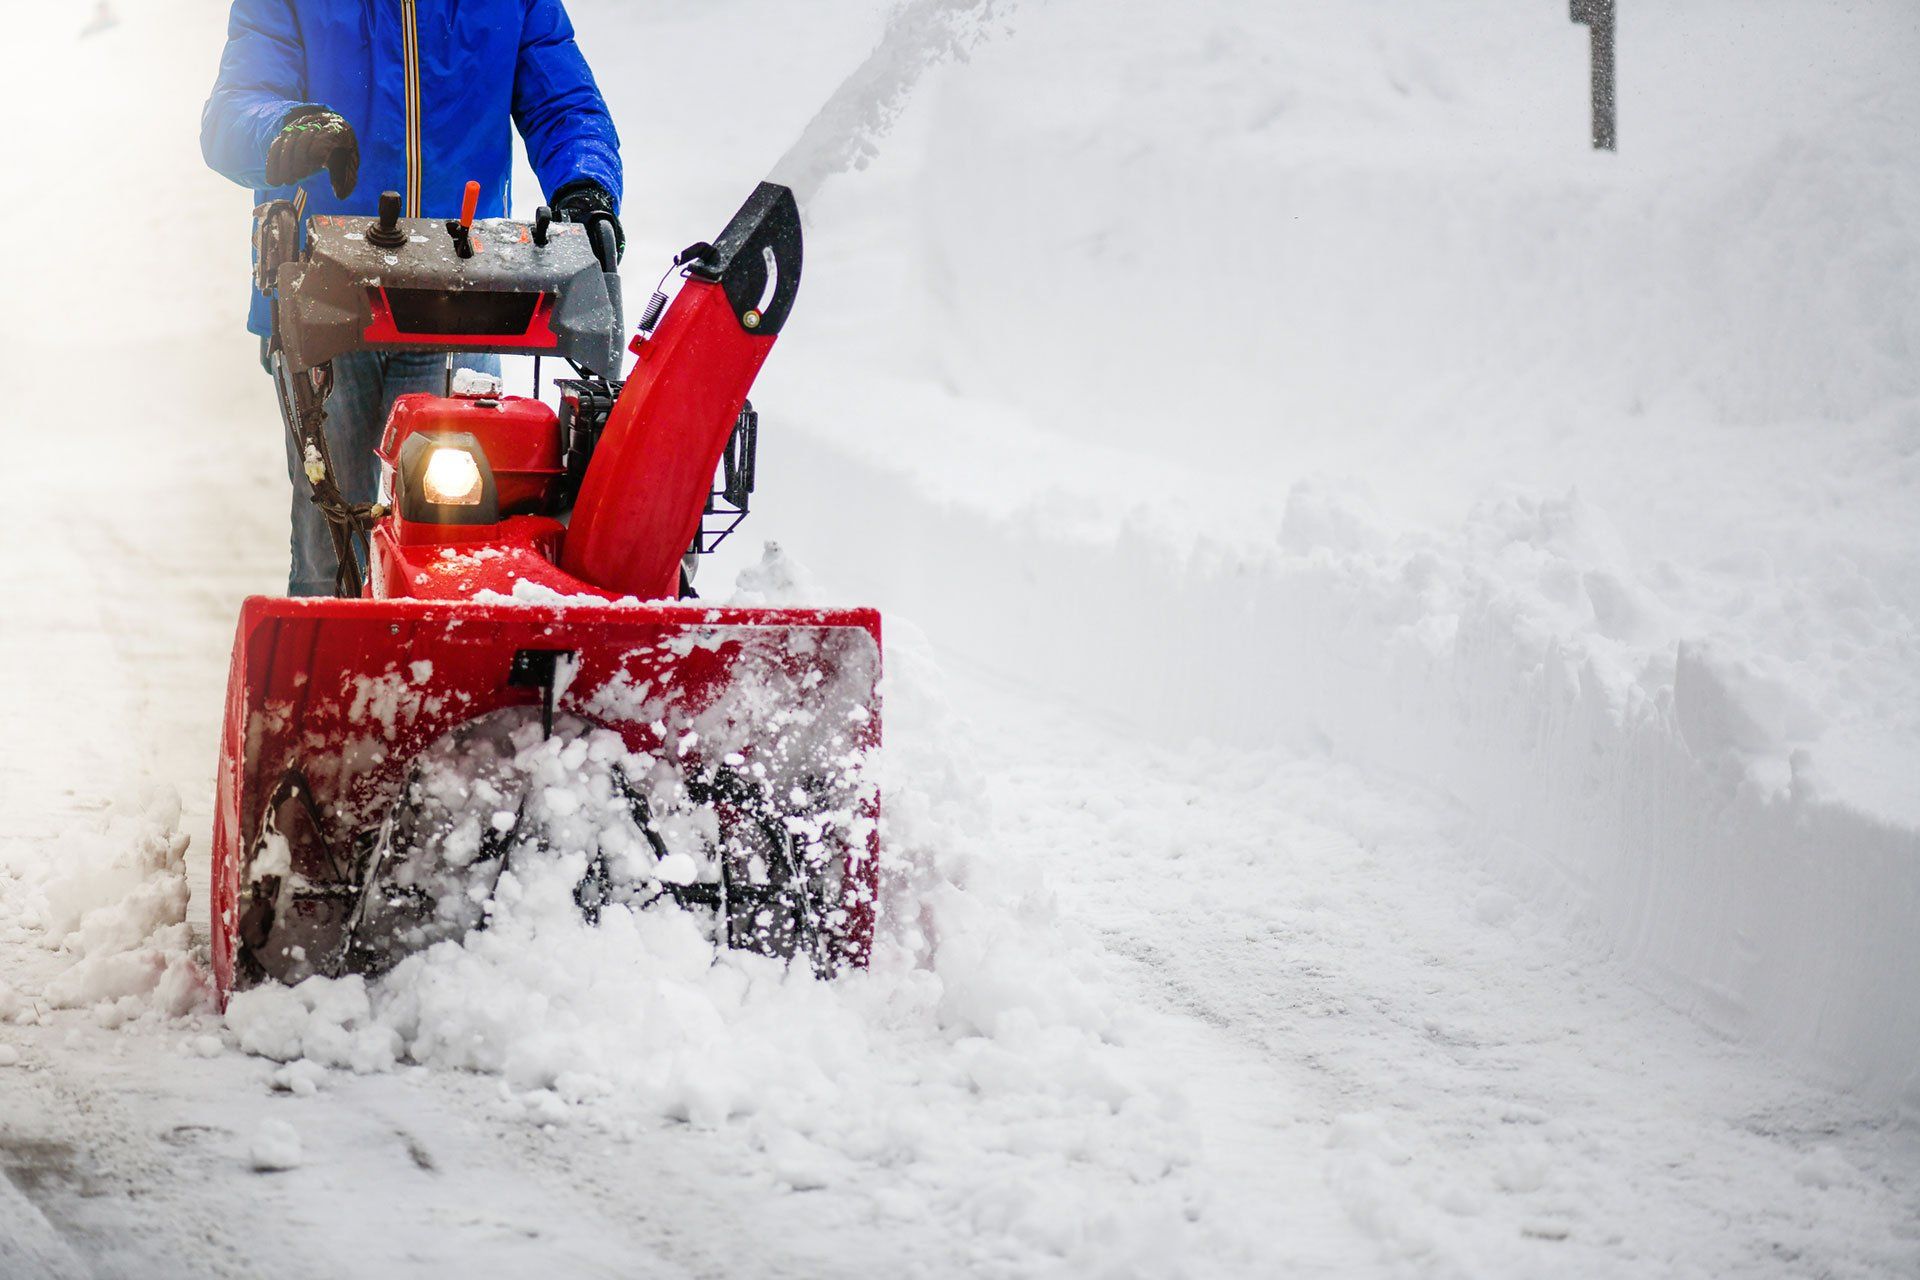 Man clearing or removing snow with a snowblower